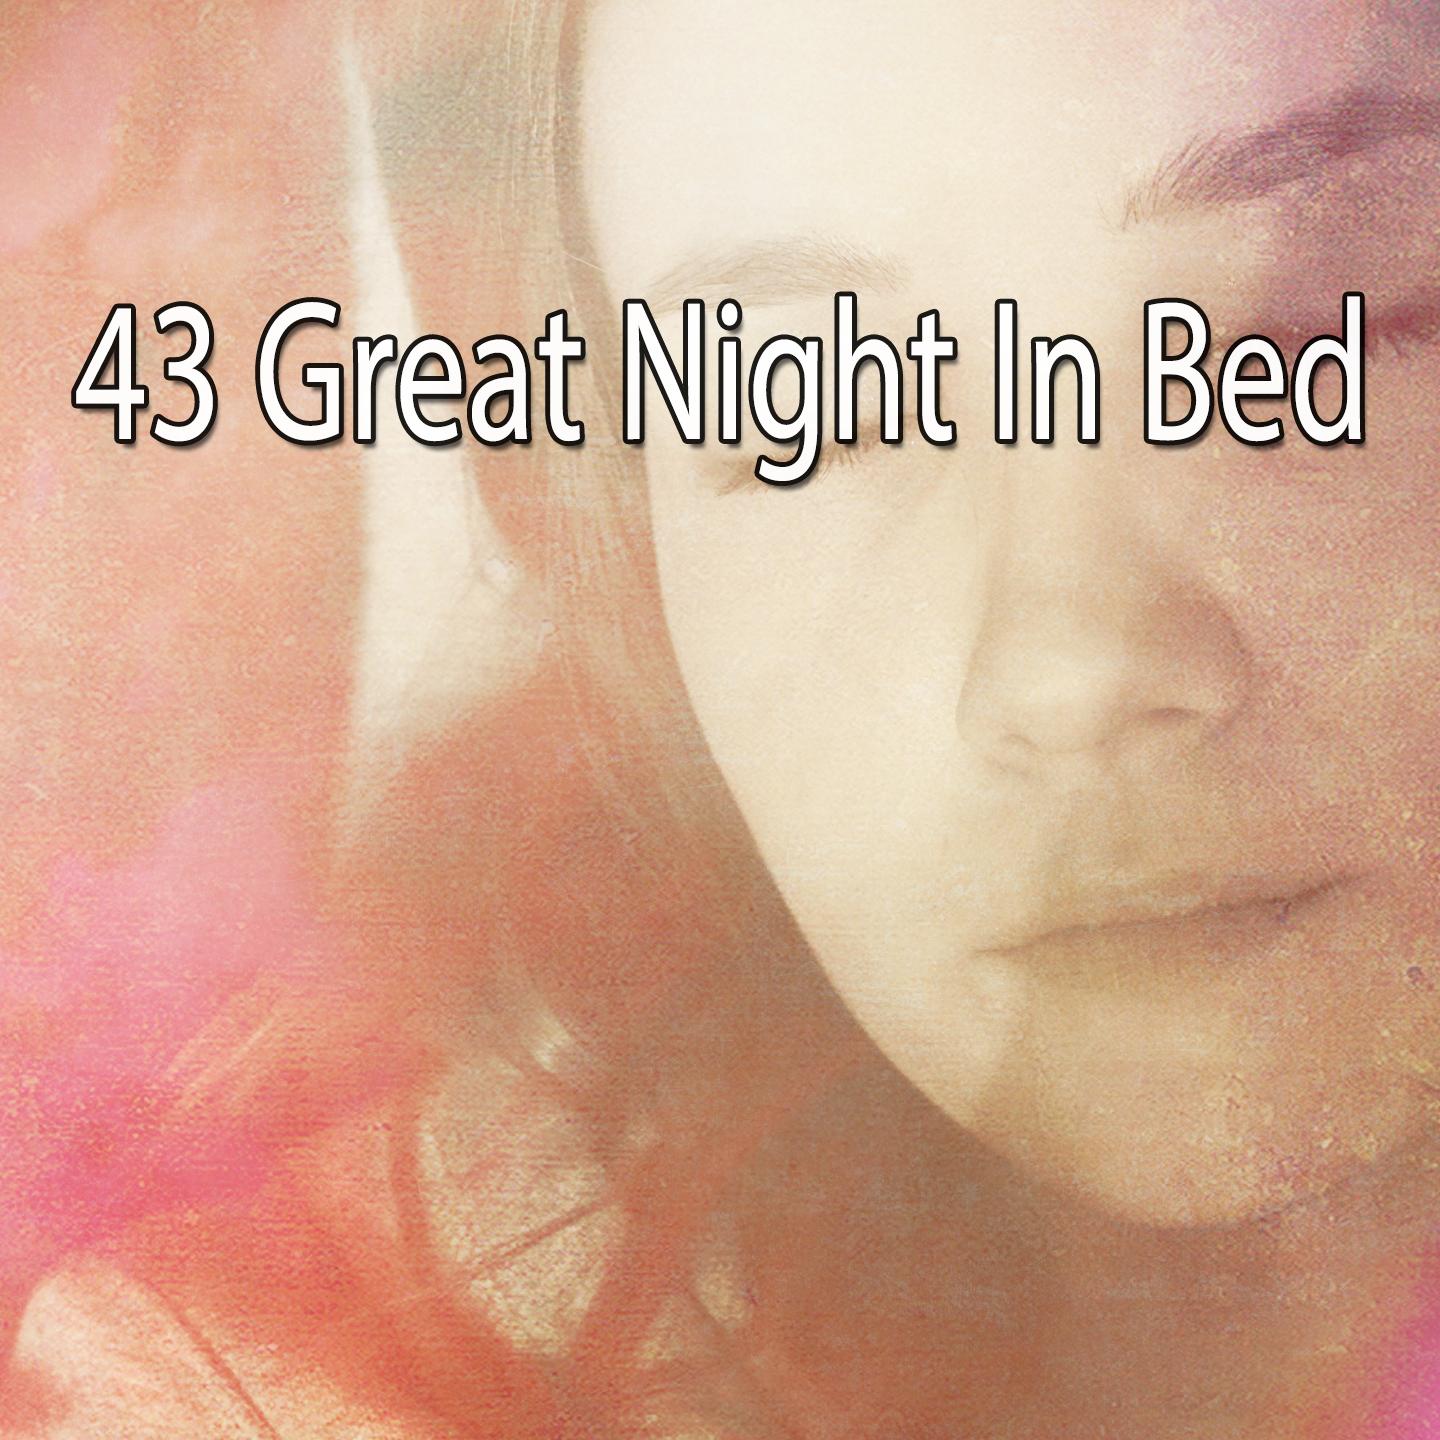 43 Great Night in Bed